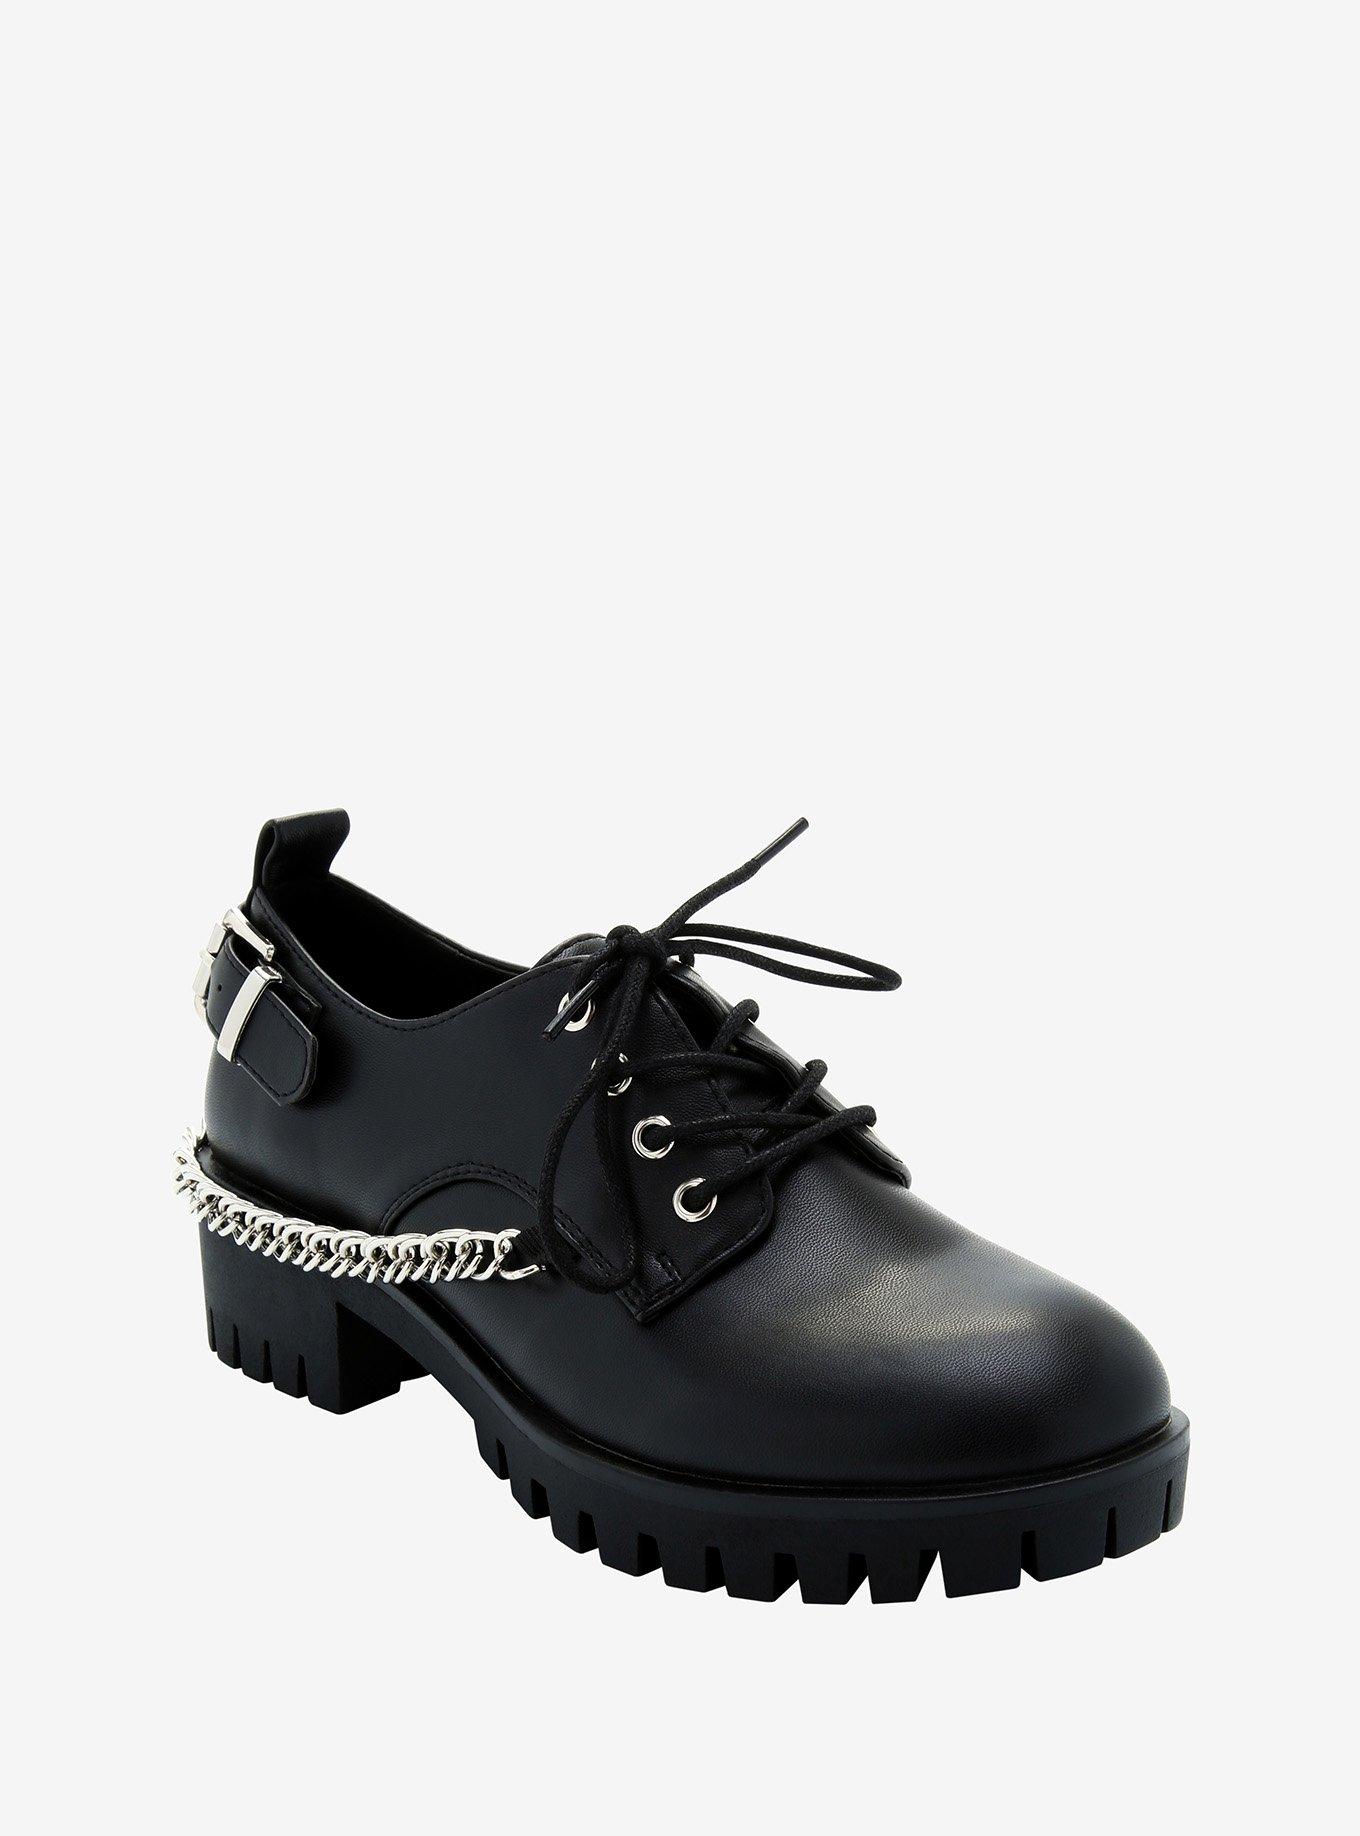 Black Buckle & Chain Lace-Up Oxfords, MULTI, hi-res